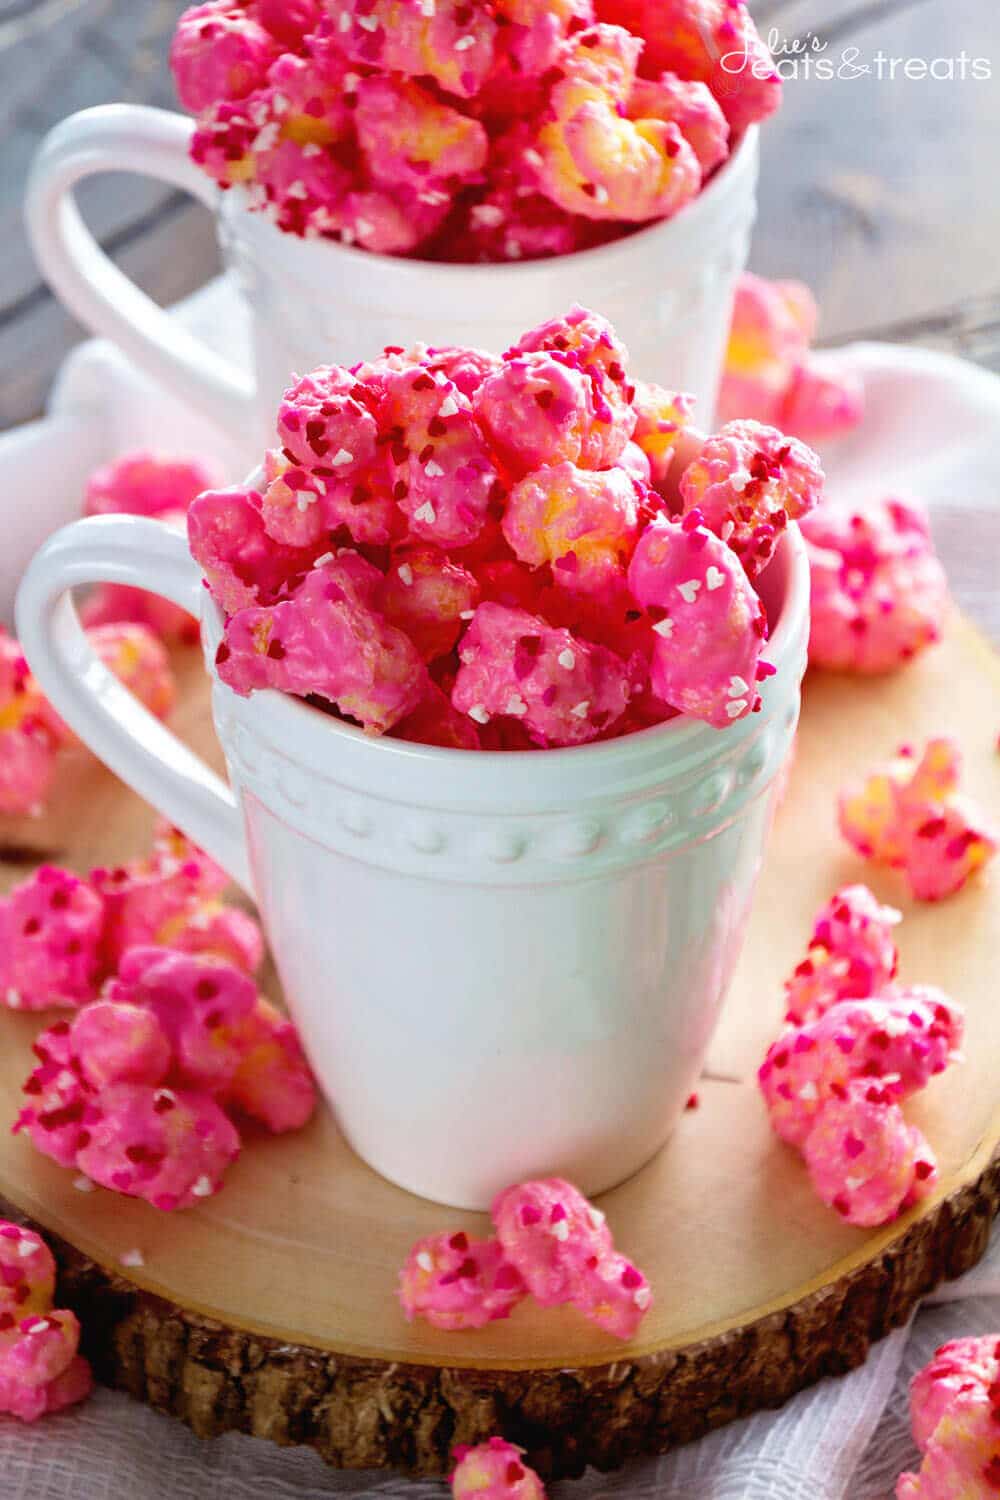 Puff Corn Valentines Snack Mix ~ Delicious, Festive Valentine's Day Snack Mix! Perfectly Sweet and Salty Plus So Easy the Kids Can Help!